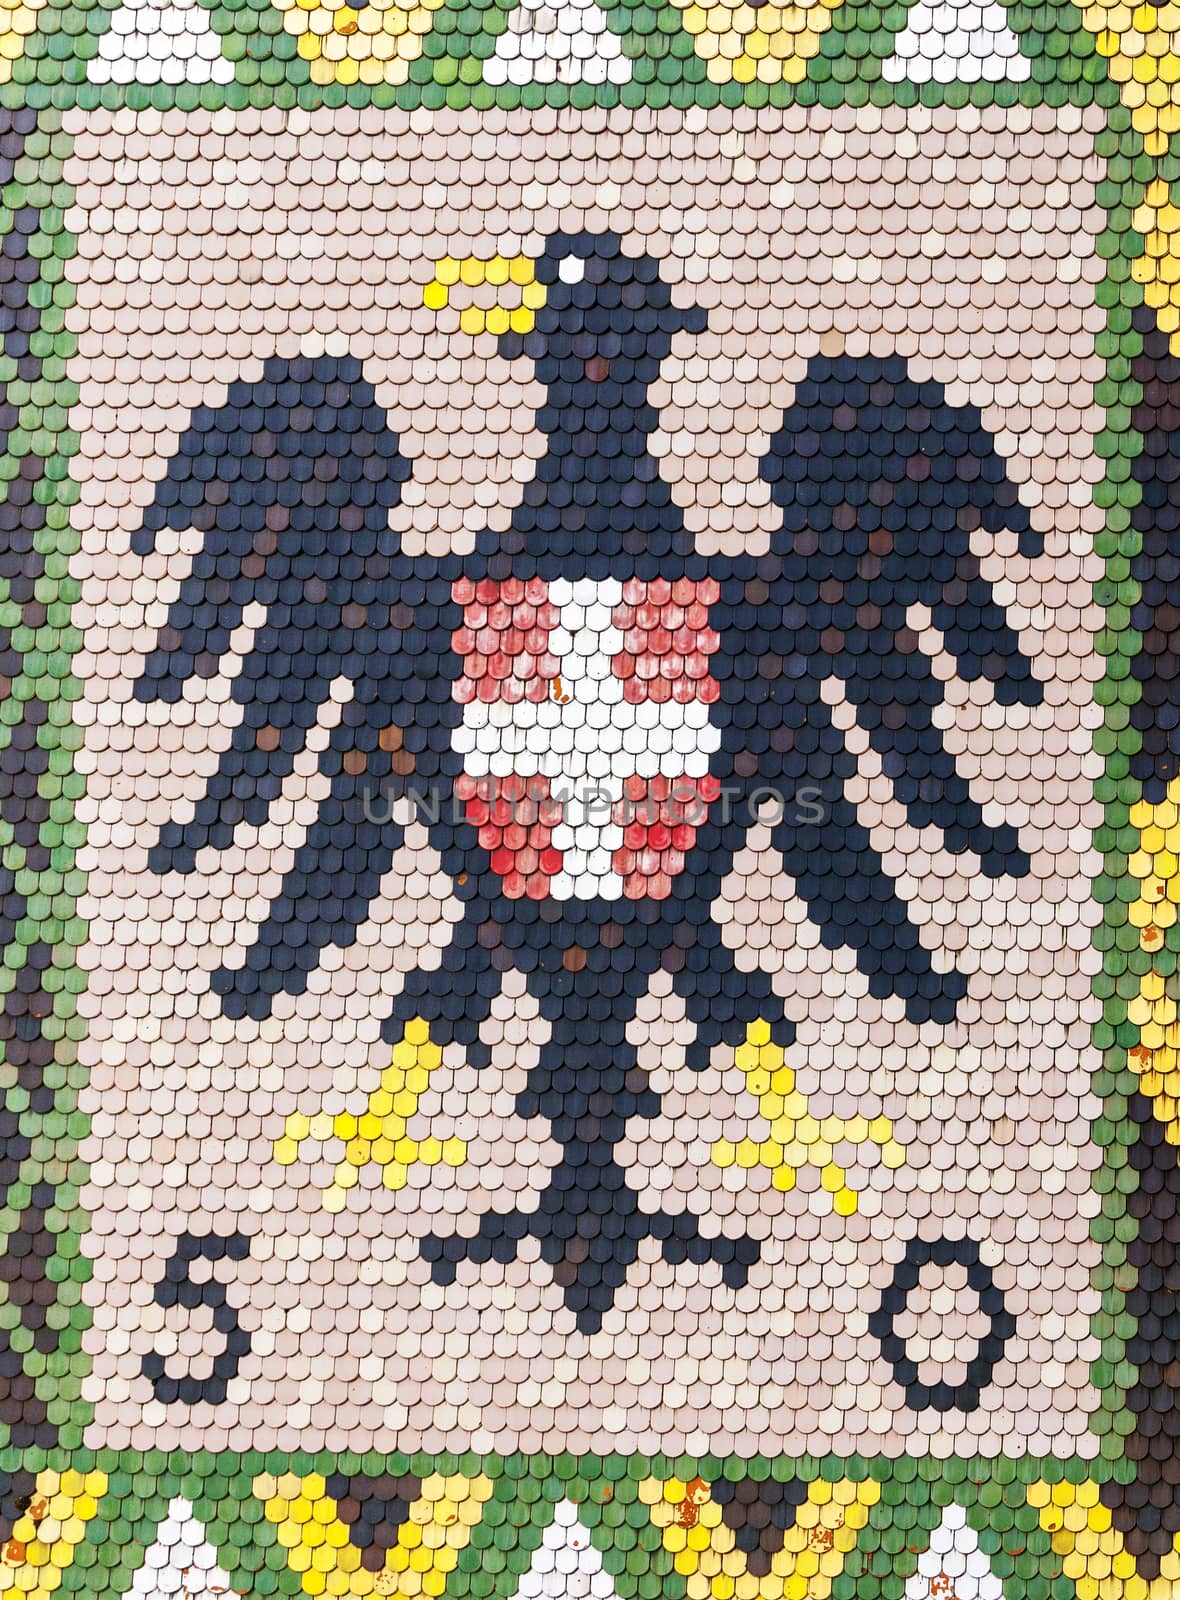 Austrian coat of arms on roof of Stephansdom cathedral, Vienna, Austria